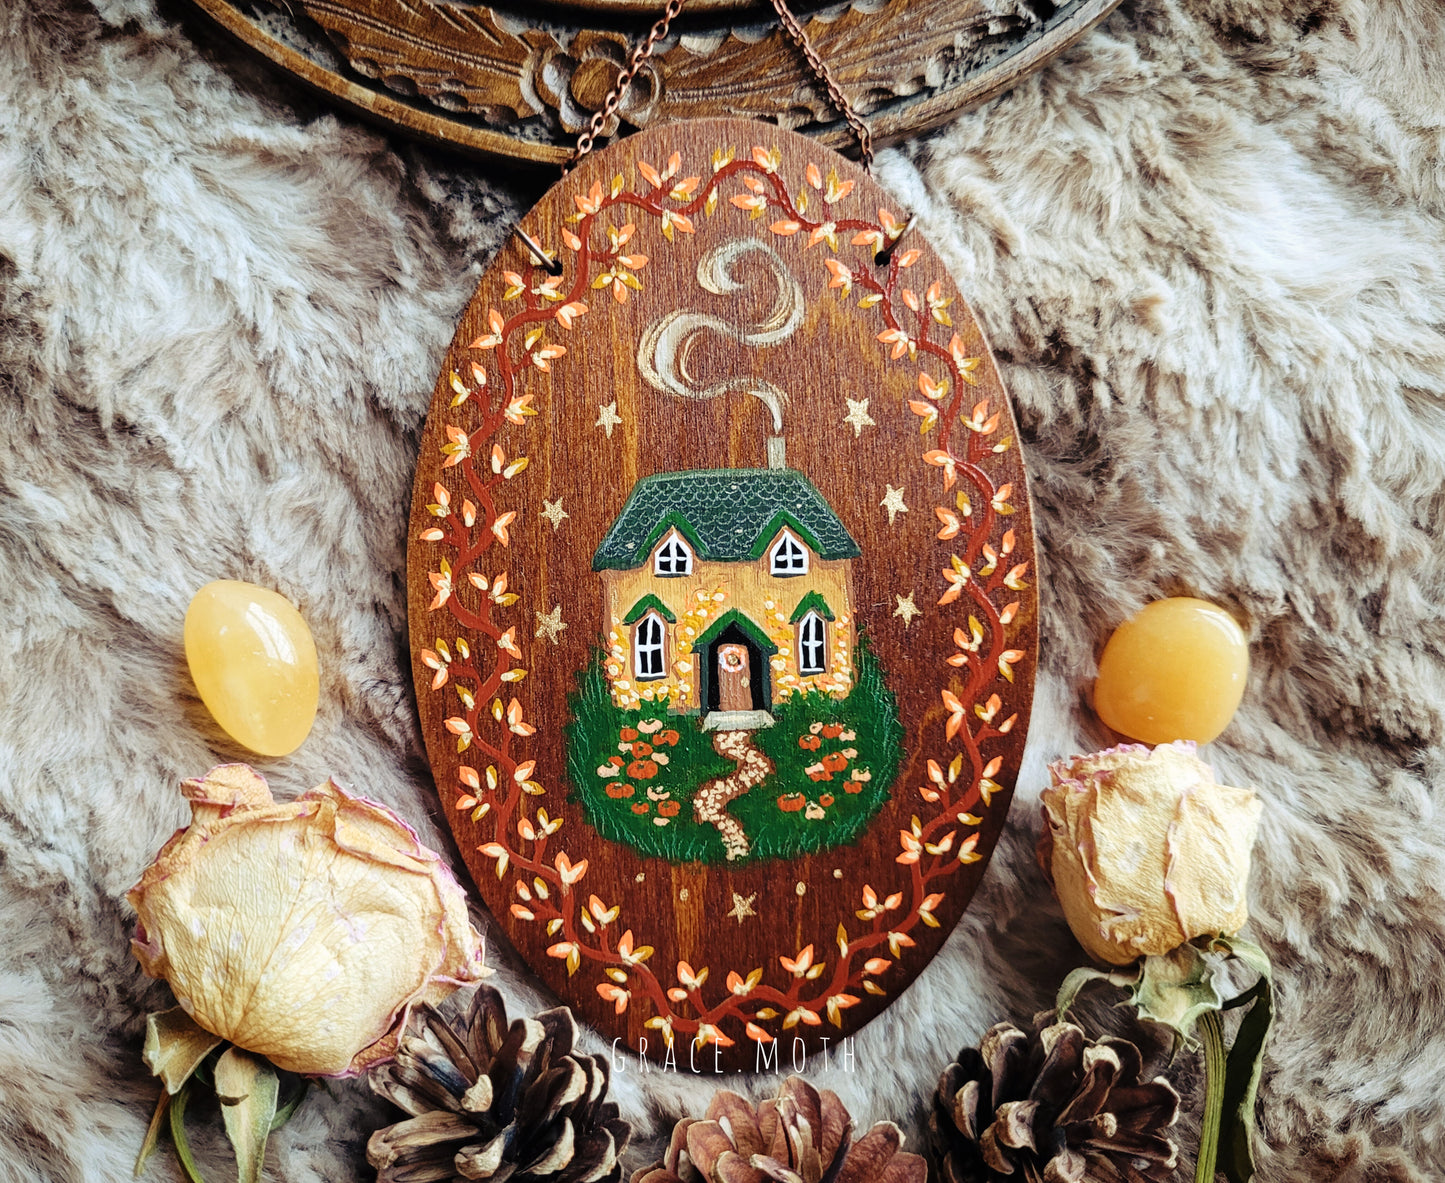 Original painted Autumn Cottage - One of a kind handmade wall hanging/ornament by Grace Moth